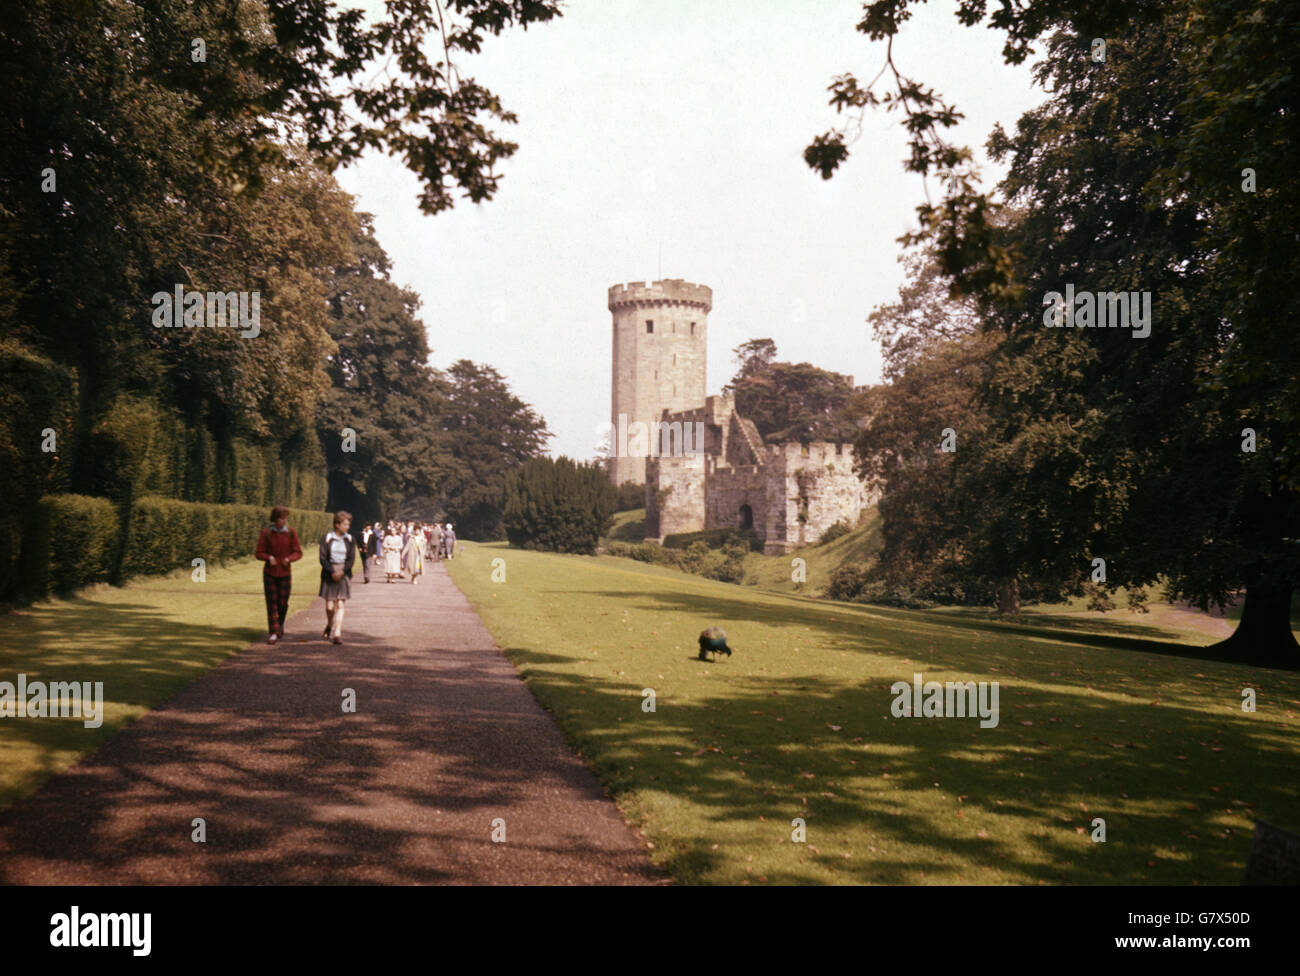 Buildings and Landmarks - Warwick Castle. One of the towers at Warwick Castle. Stock Photo